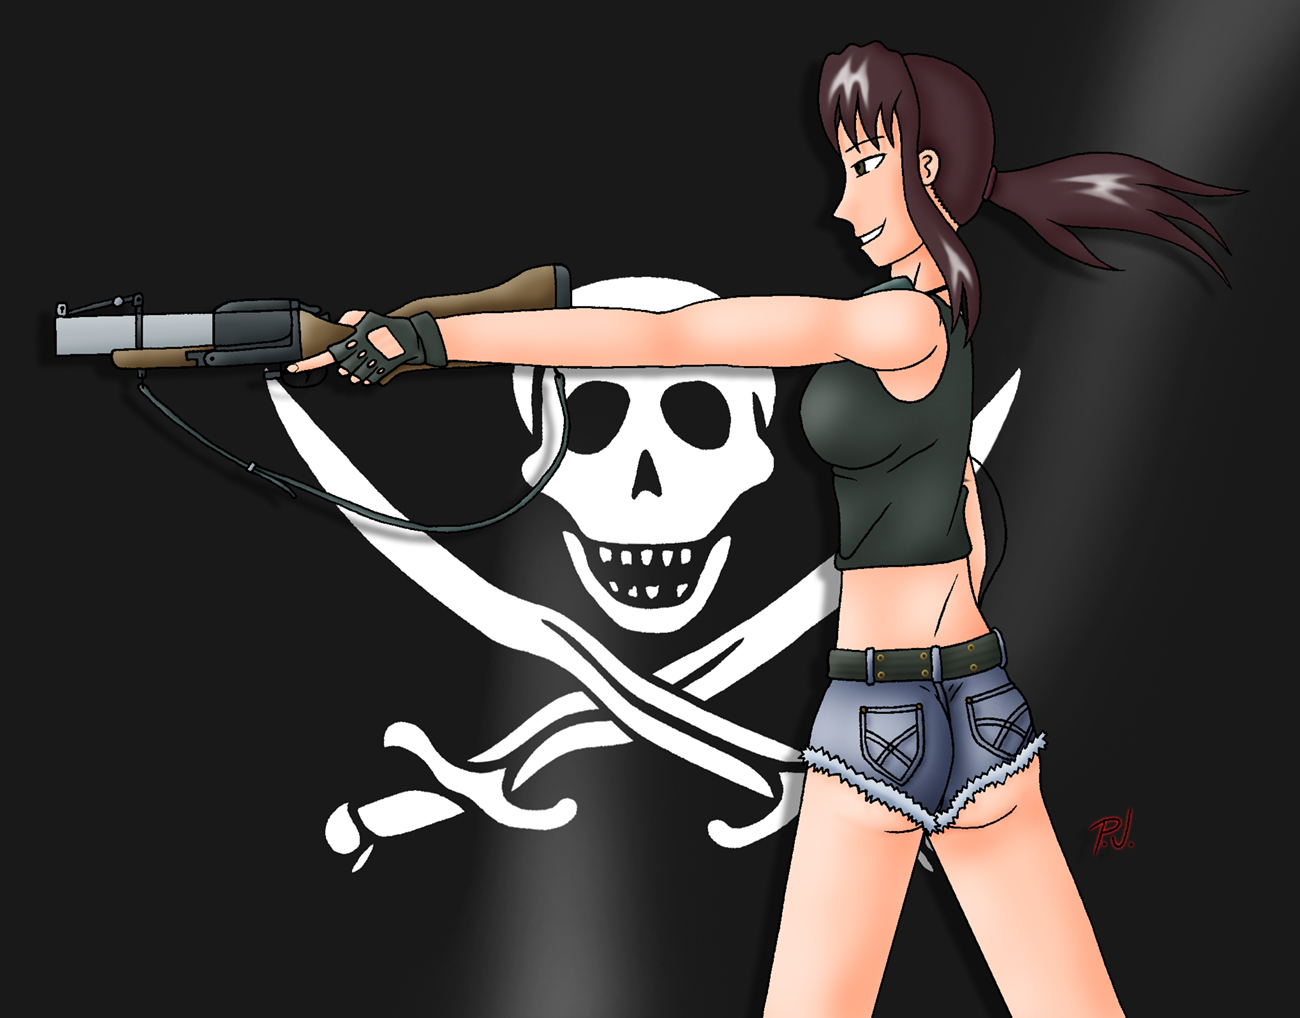 Revy´s going to destroy something! by 357